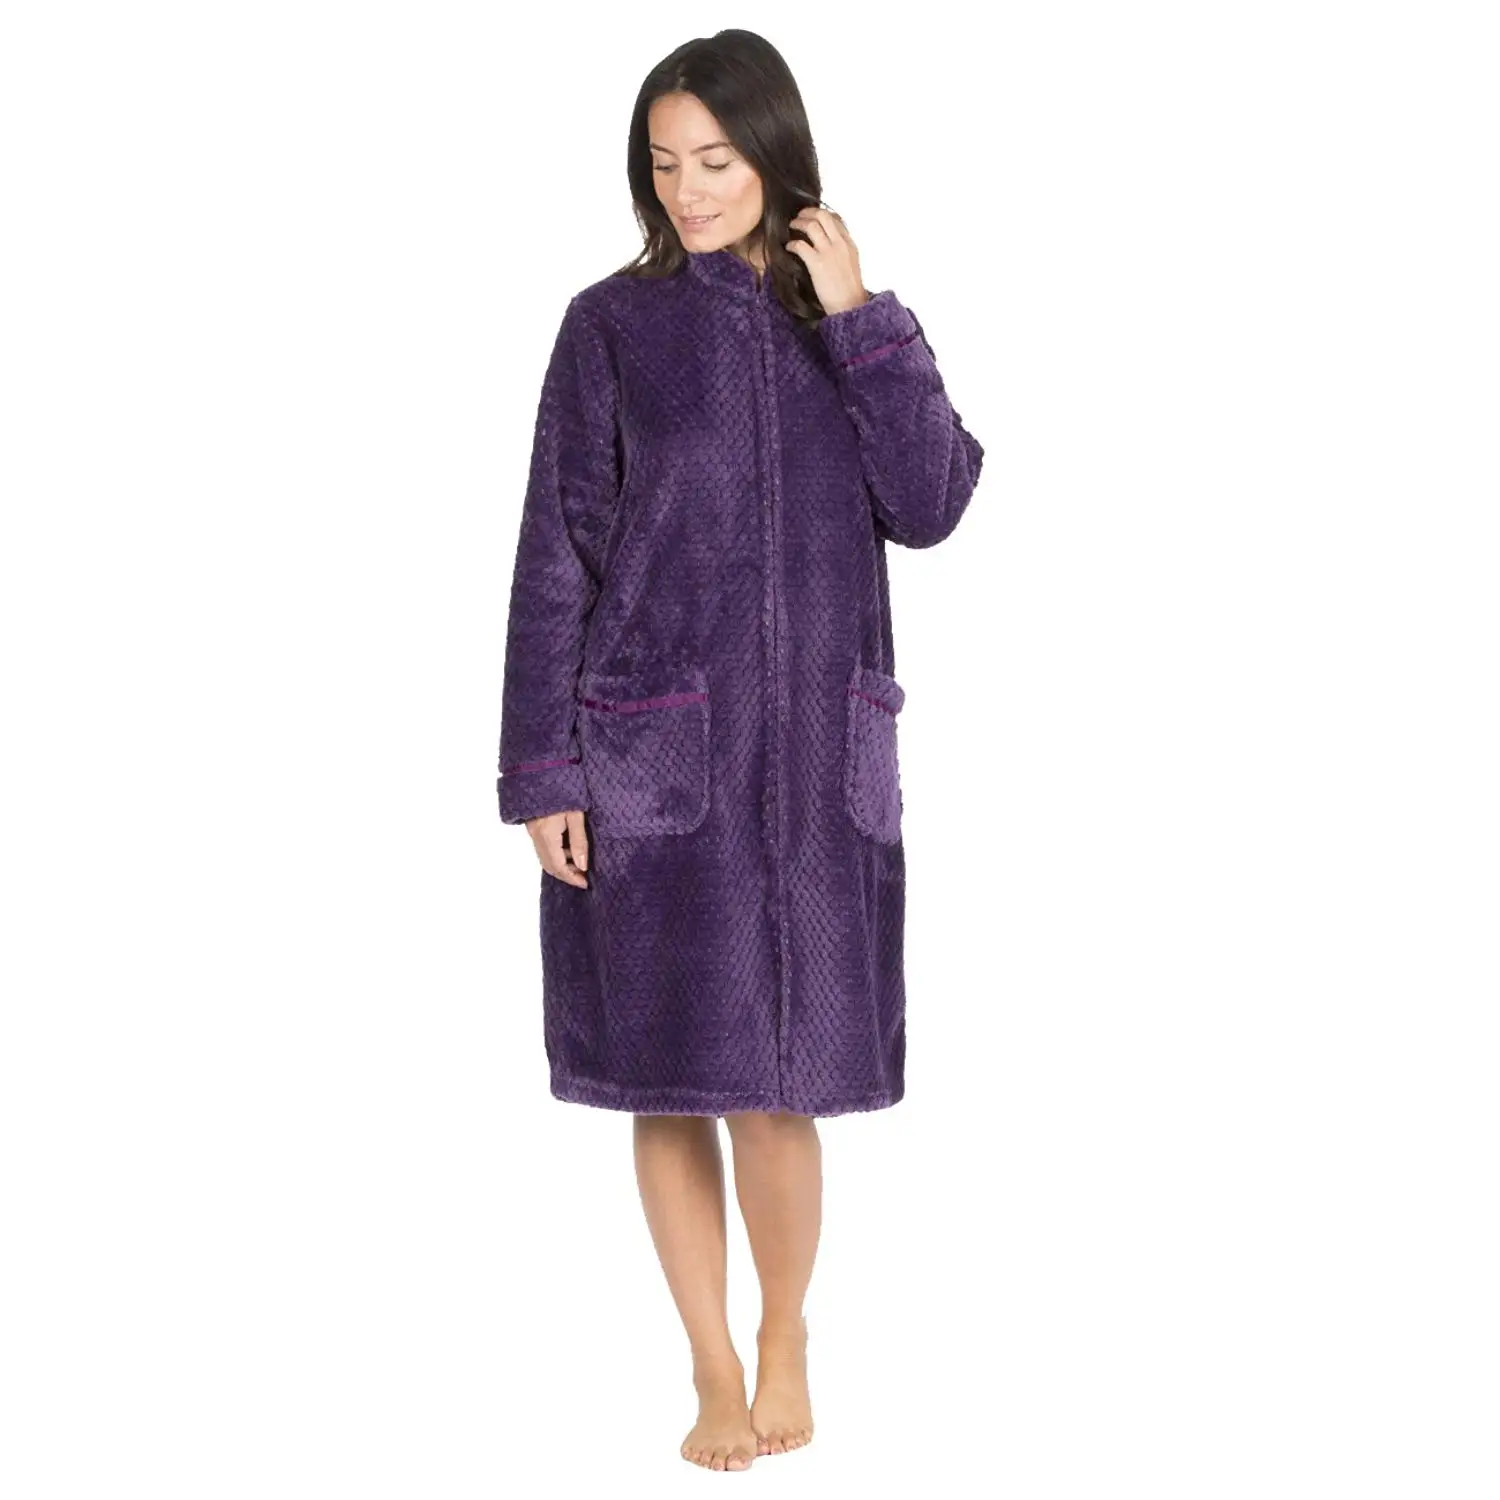 Cheap Super Fluffy Dressing Gown Find Super Fluffy Dressing Gown Deals On Line At Alibaba Com